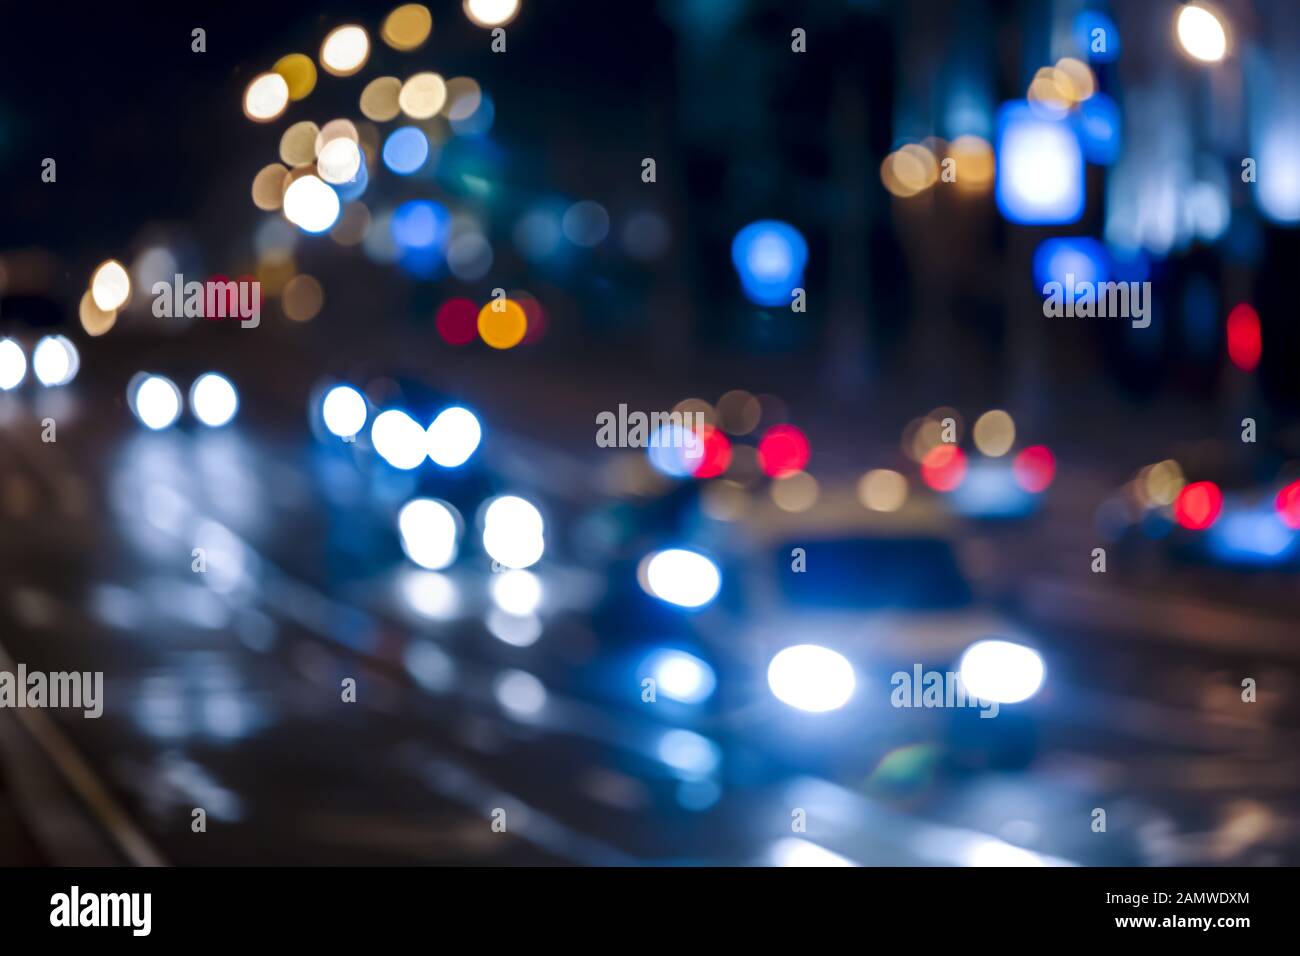 background image of blurred car lights and colorful illumination at night street Stock Photo